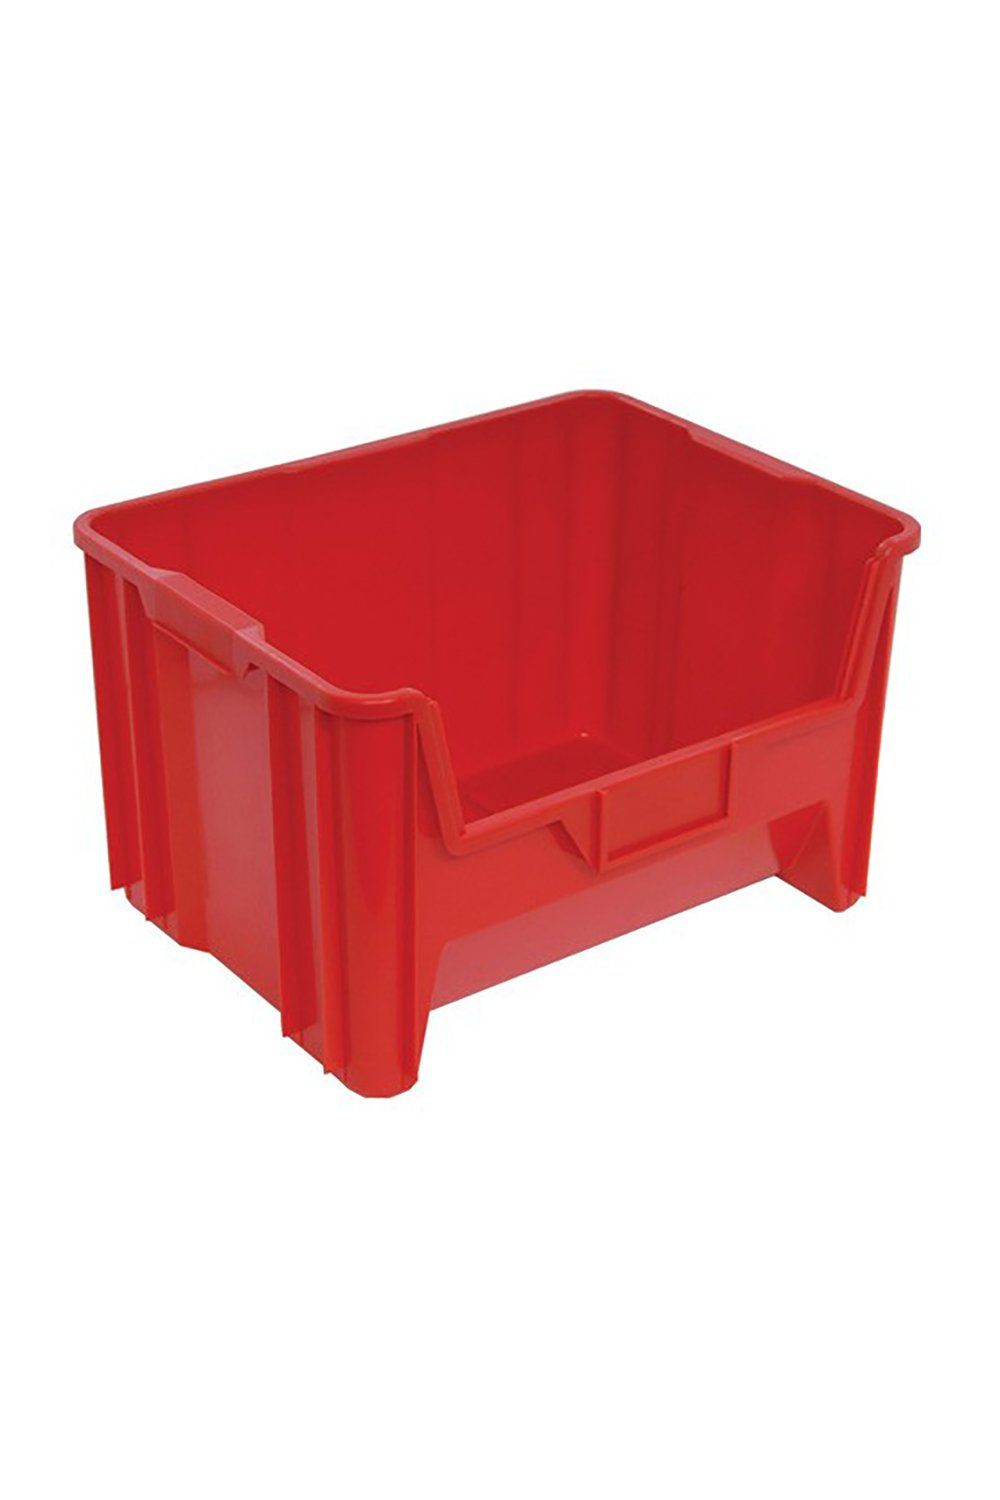 Giant Stack Container Bins & Containers Acart 15-1/4"L x 19-7/8"W x 12-7/16"H Red 